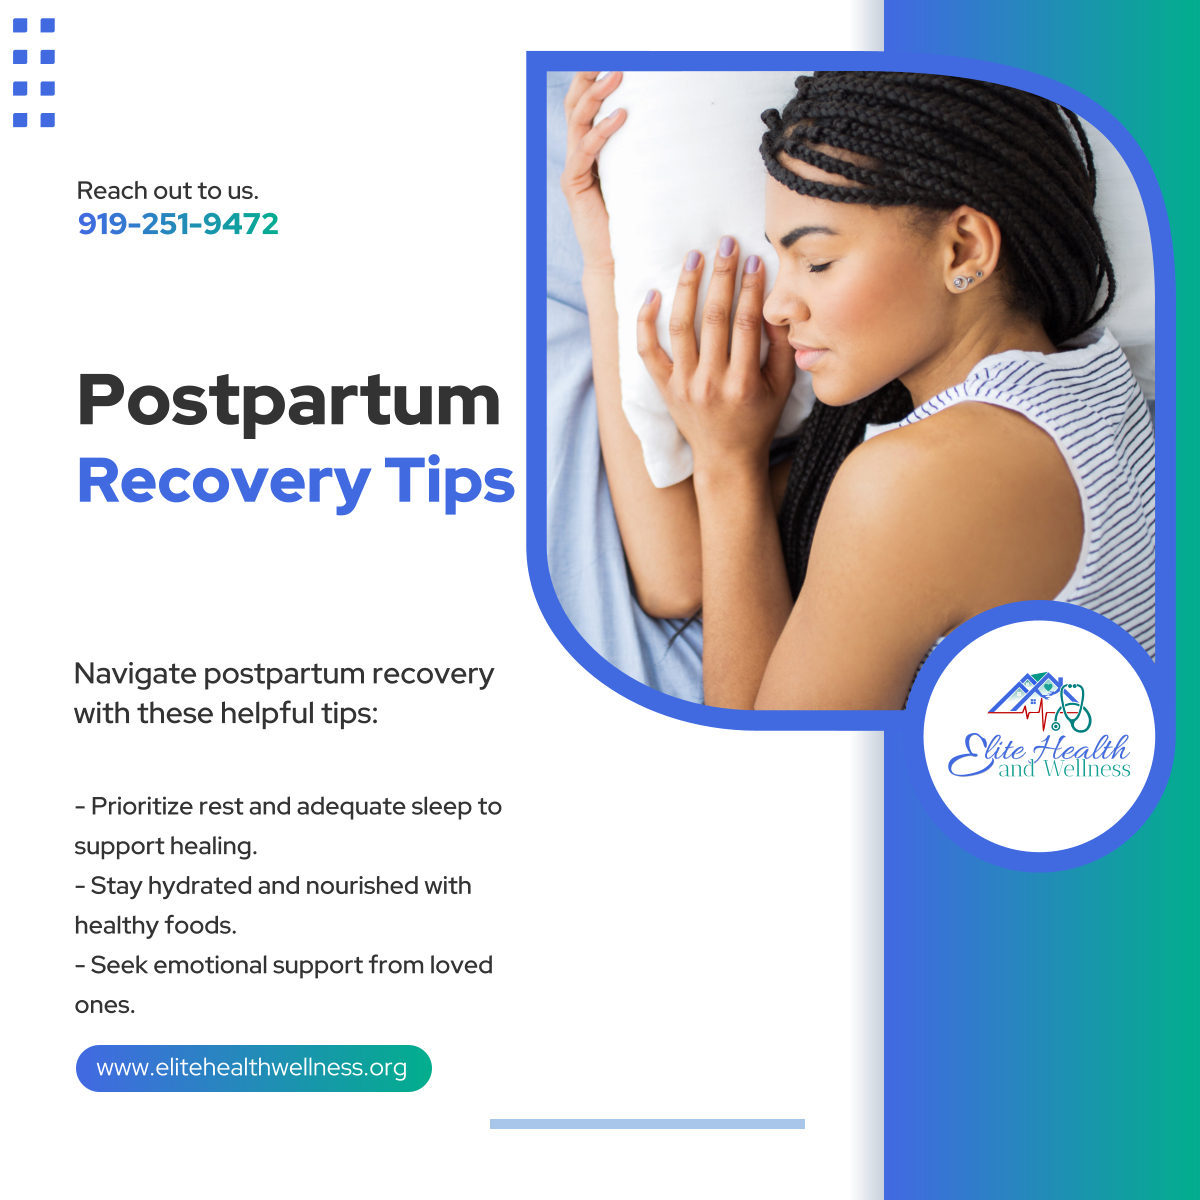 Postpartum recovery is a journey. Take care of yourself with these essential tips for a smoother transition into motherhood.

#PostpartumRecovery #DurhamNC #HomeHealthCare